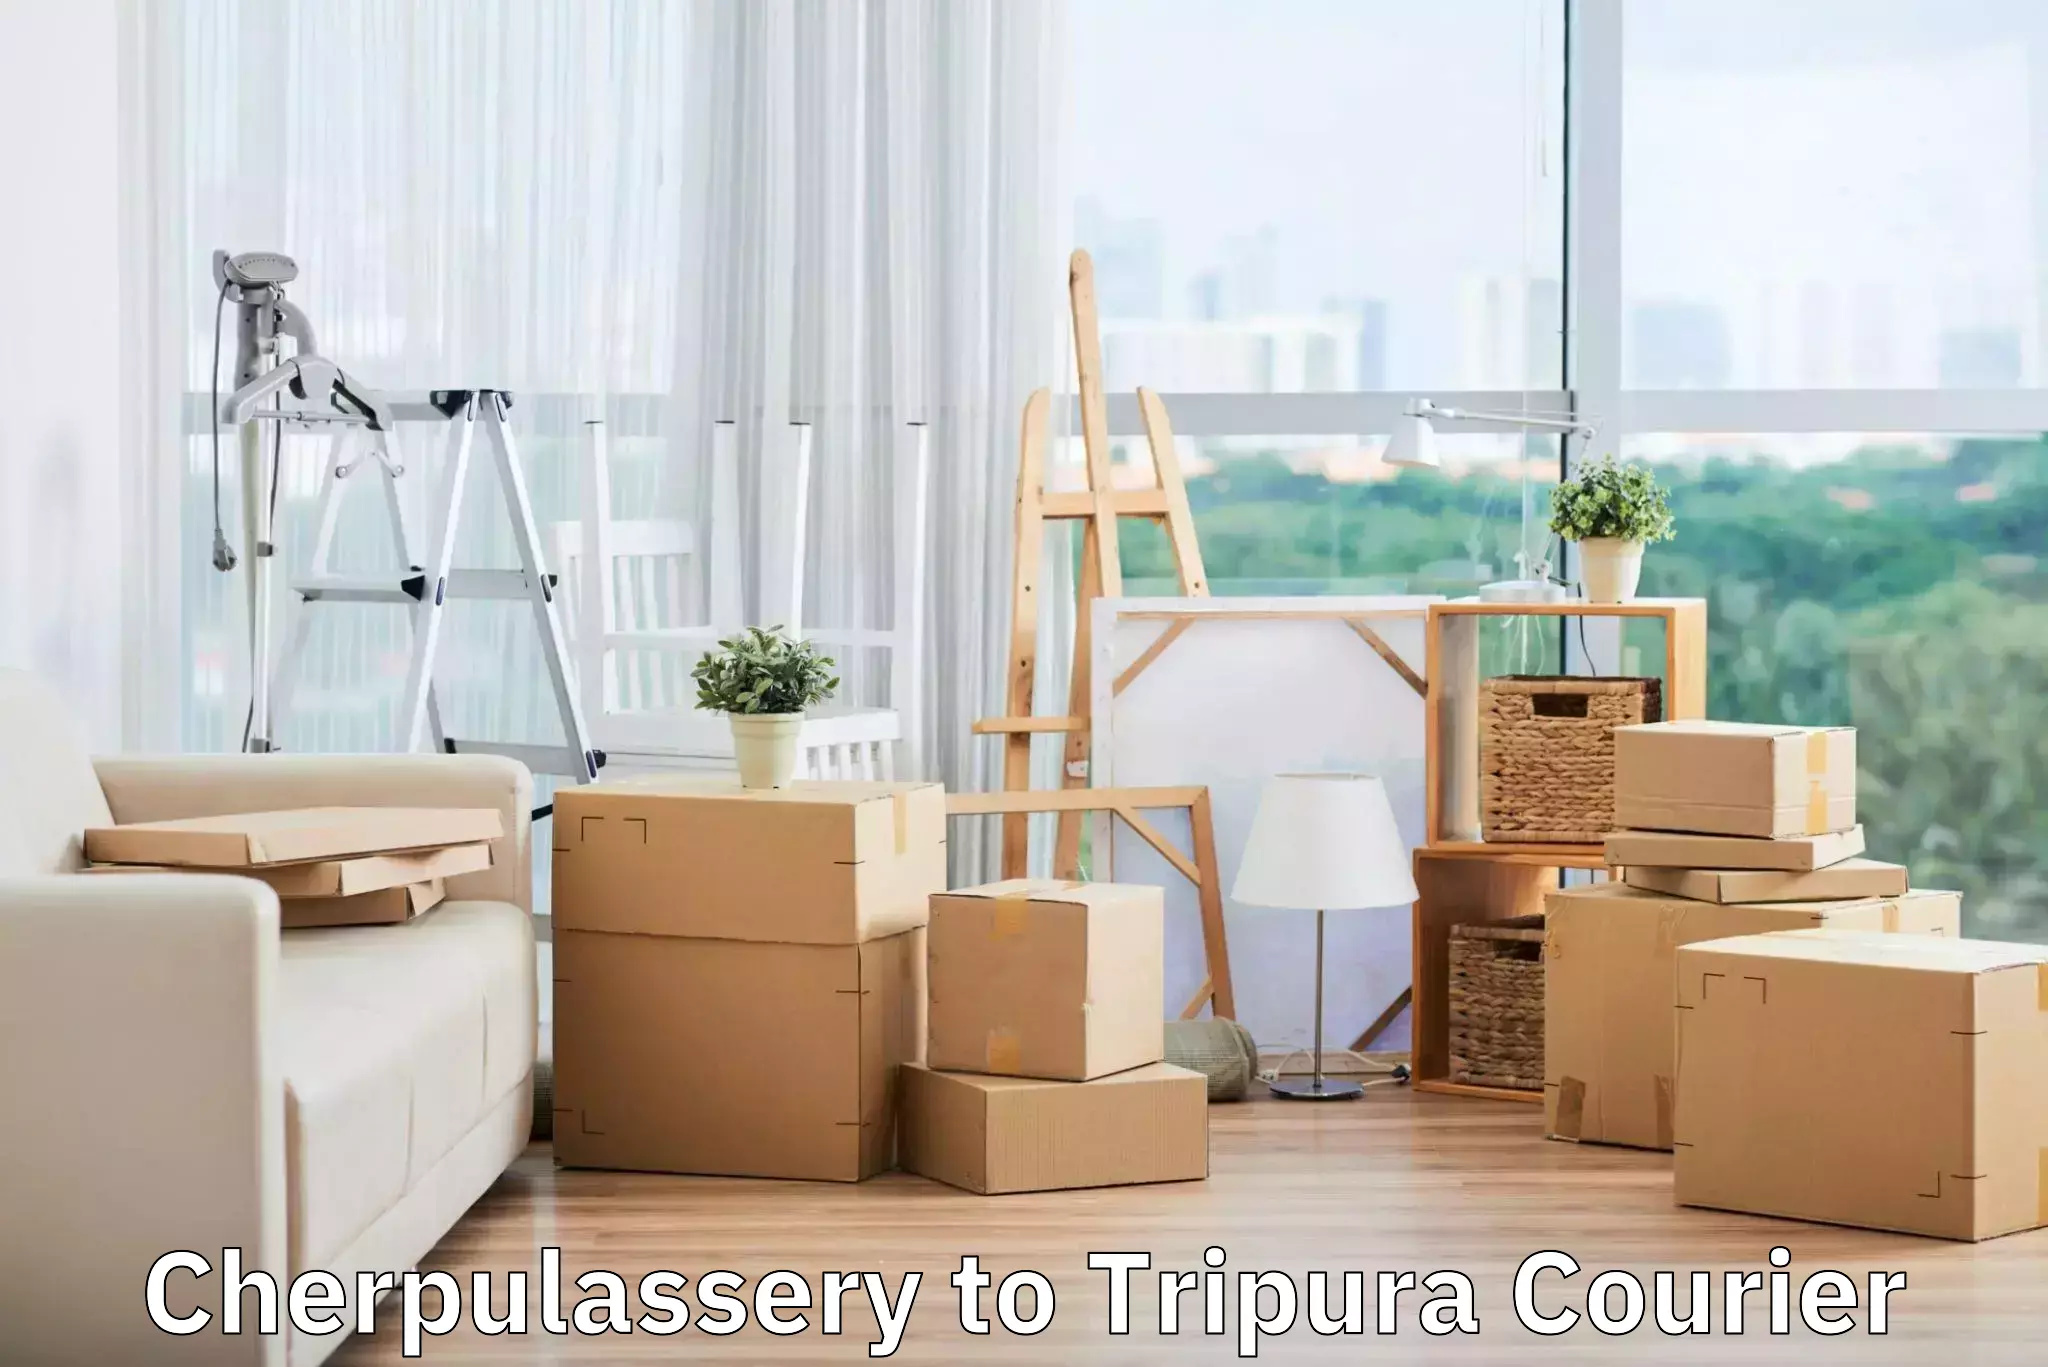 Luggage transport consulting in Cherpulassery to Udaipur Tripura